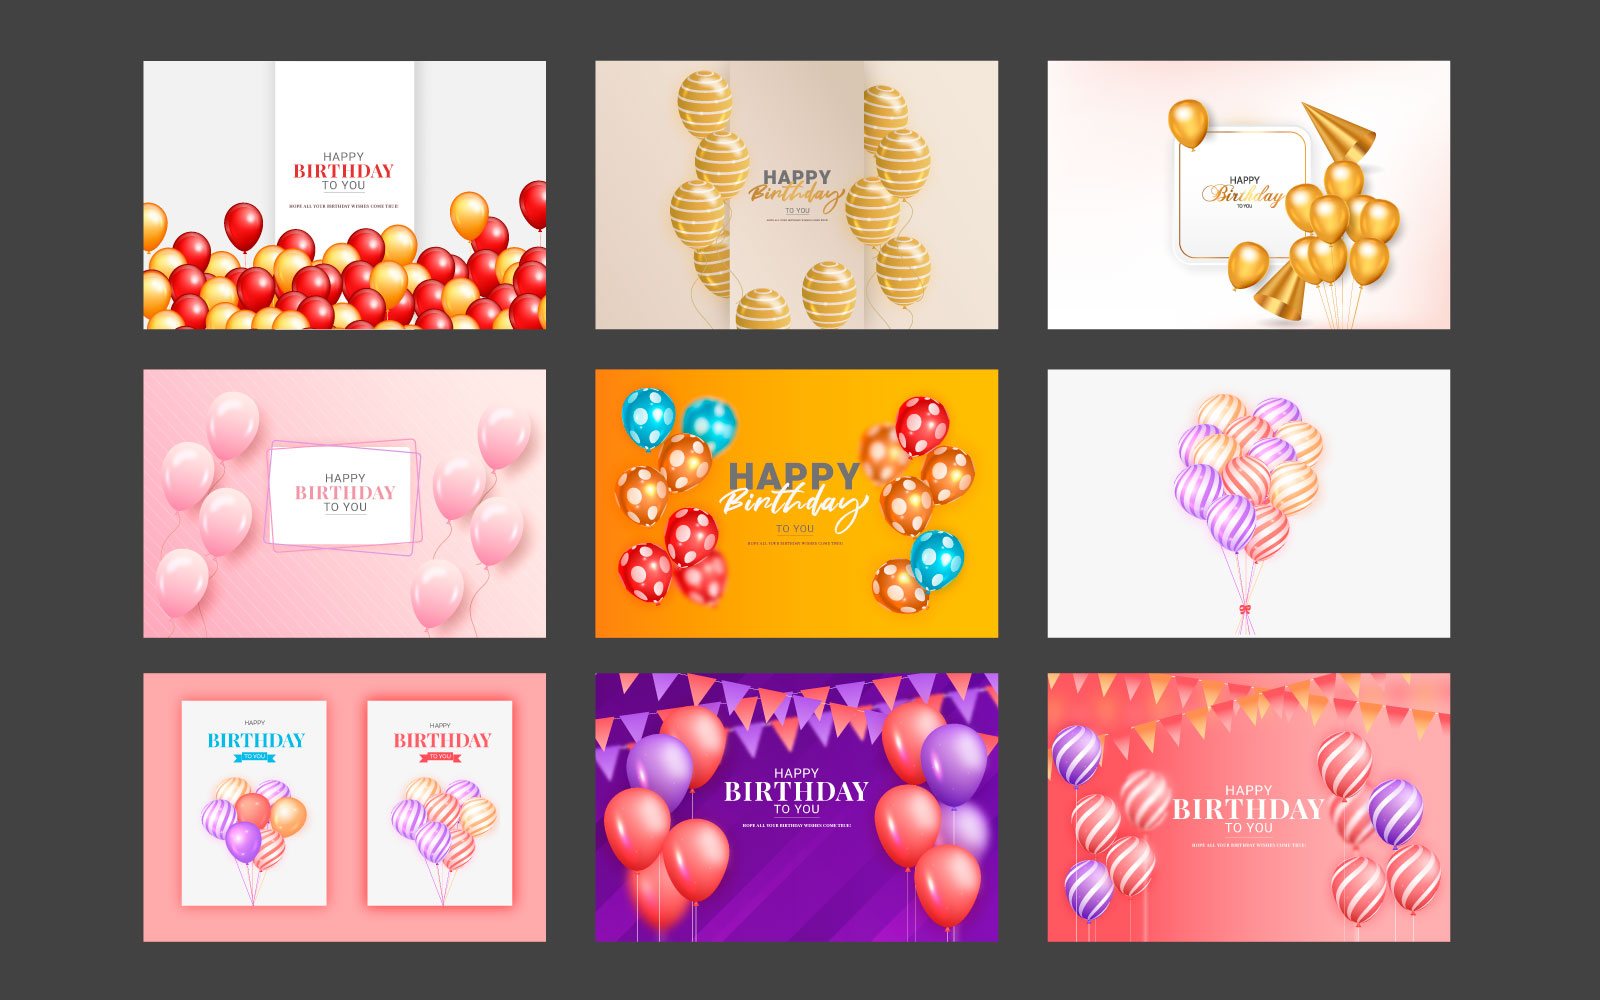 Birthday vector banner template set. Happy birthday in white space background